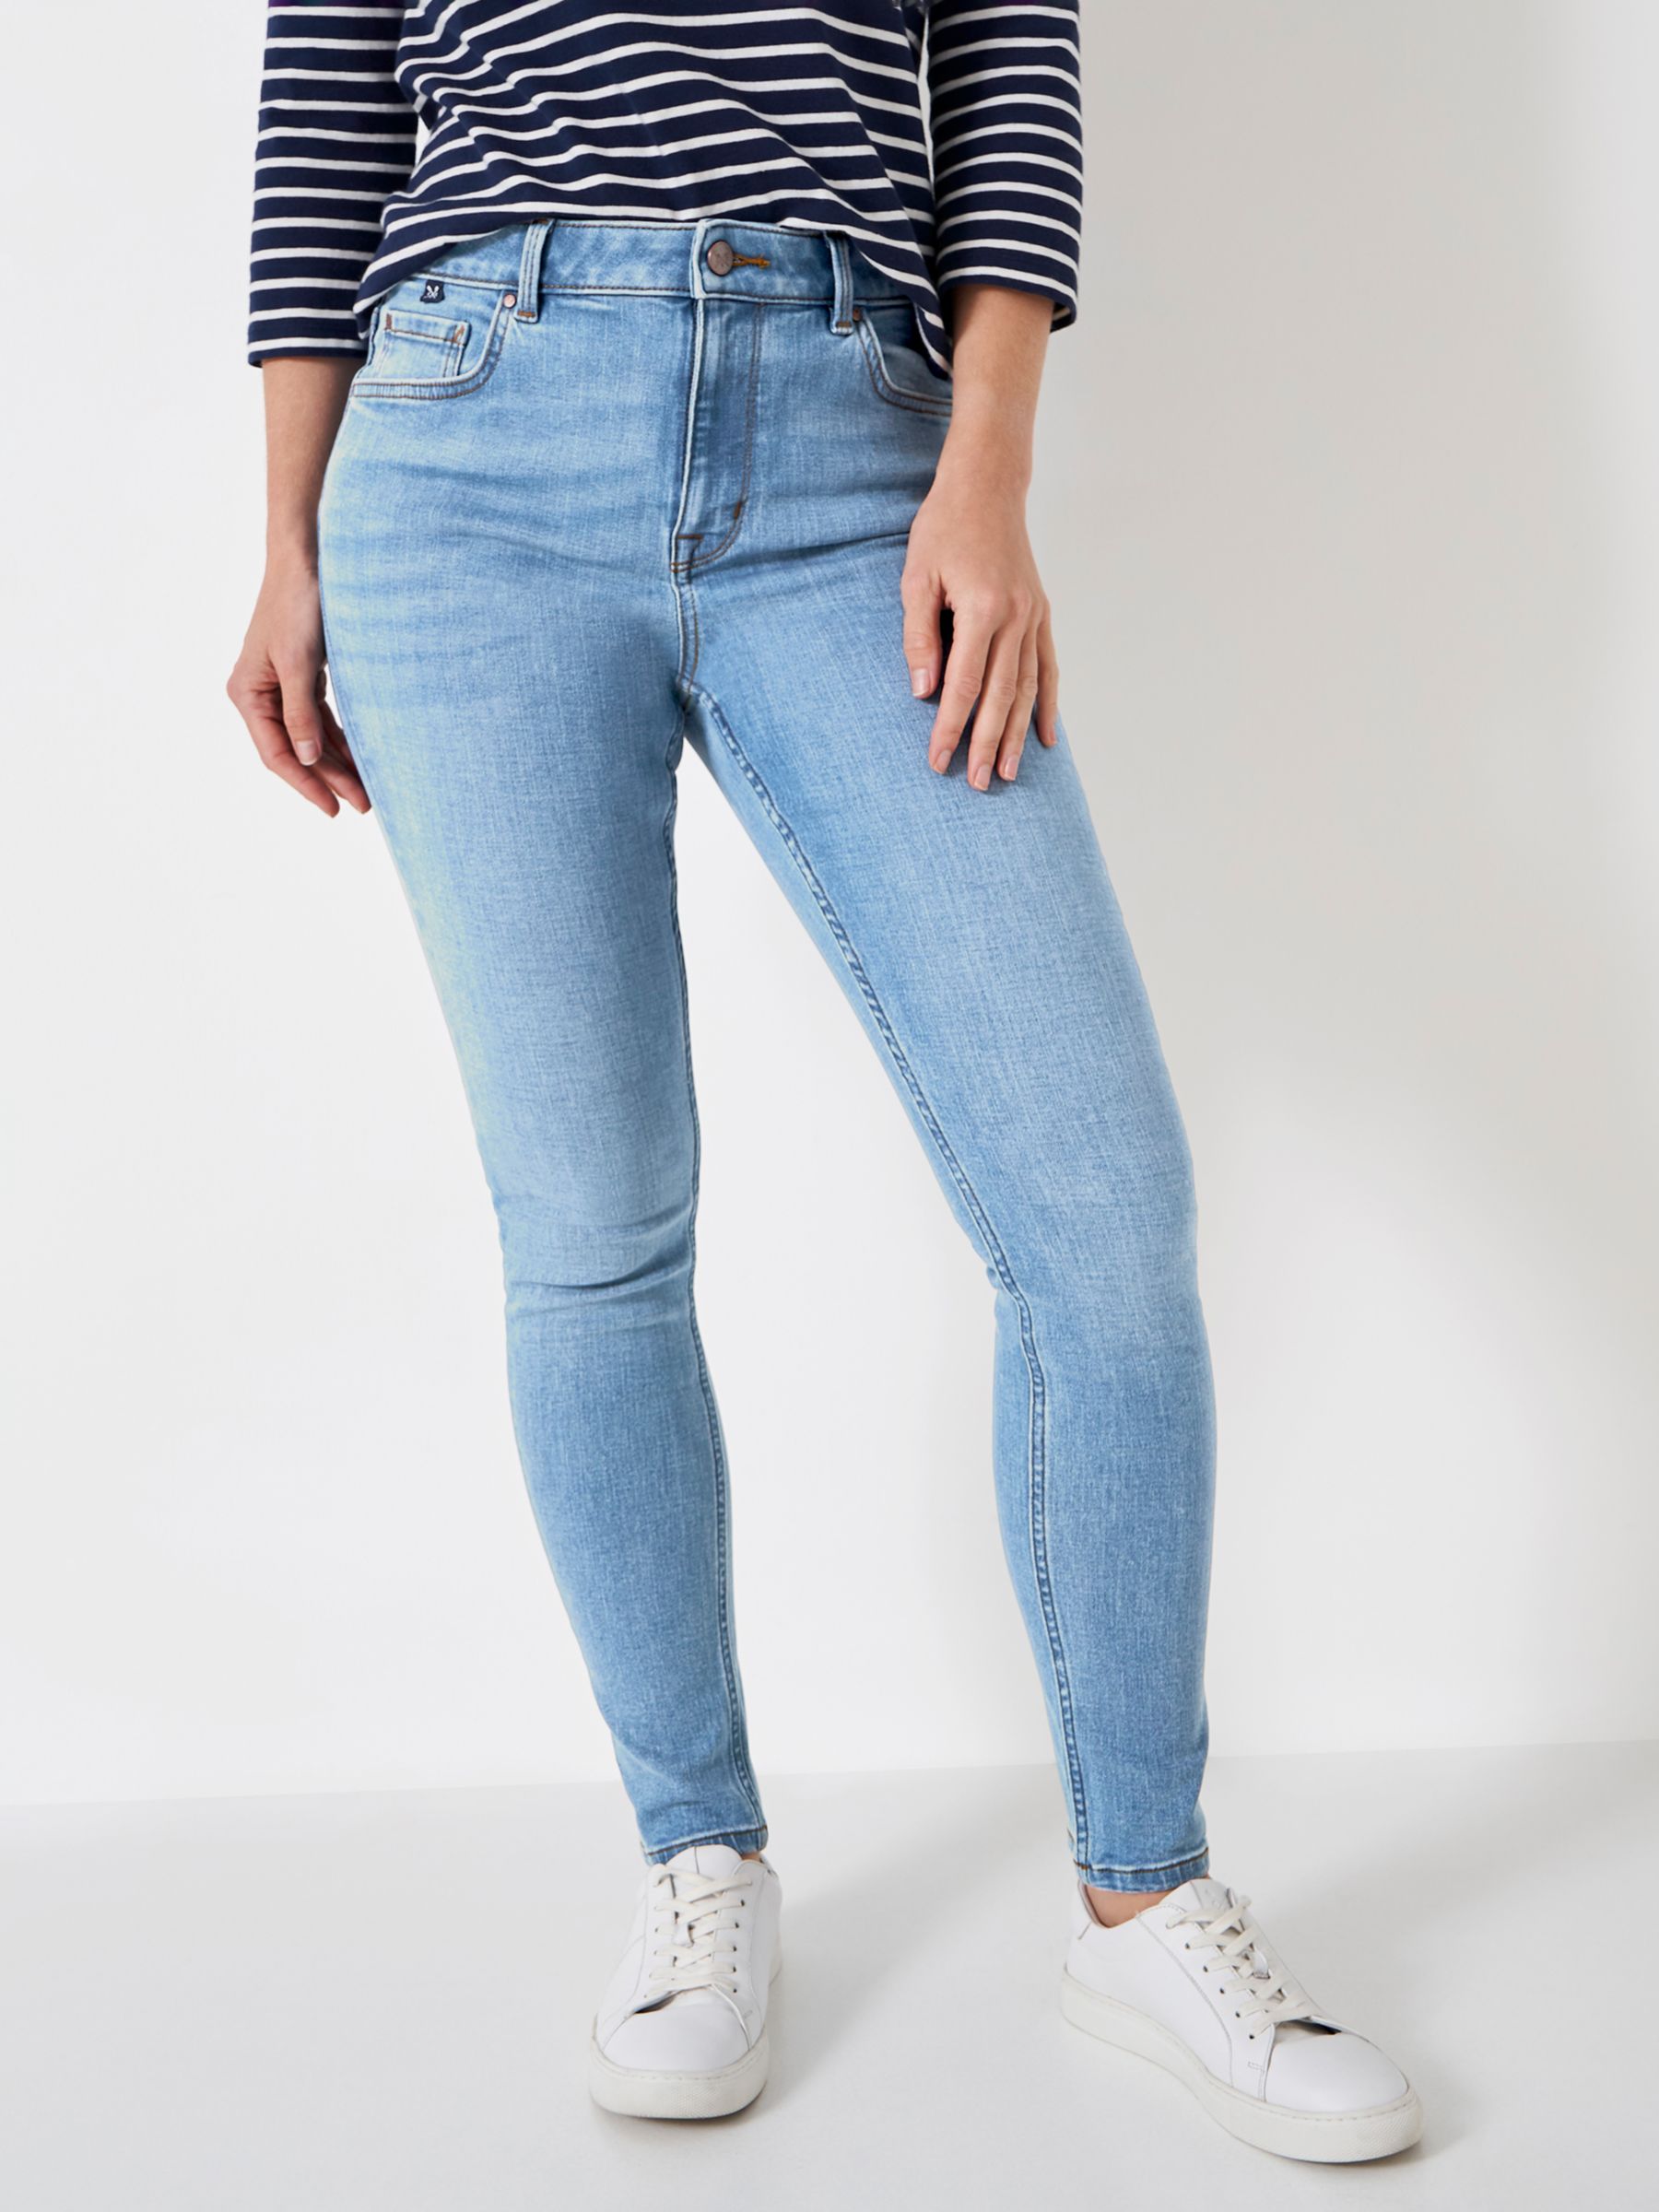 Crew Clothing Skinny Jeans, Light Wash at John Lewis & Partners